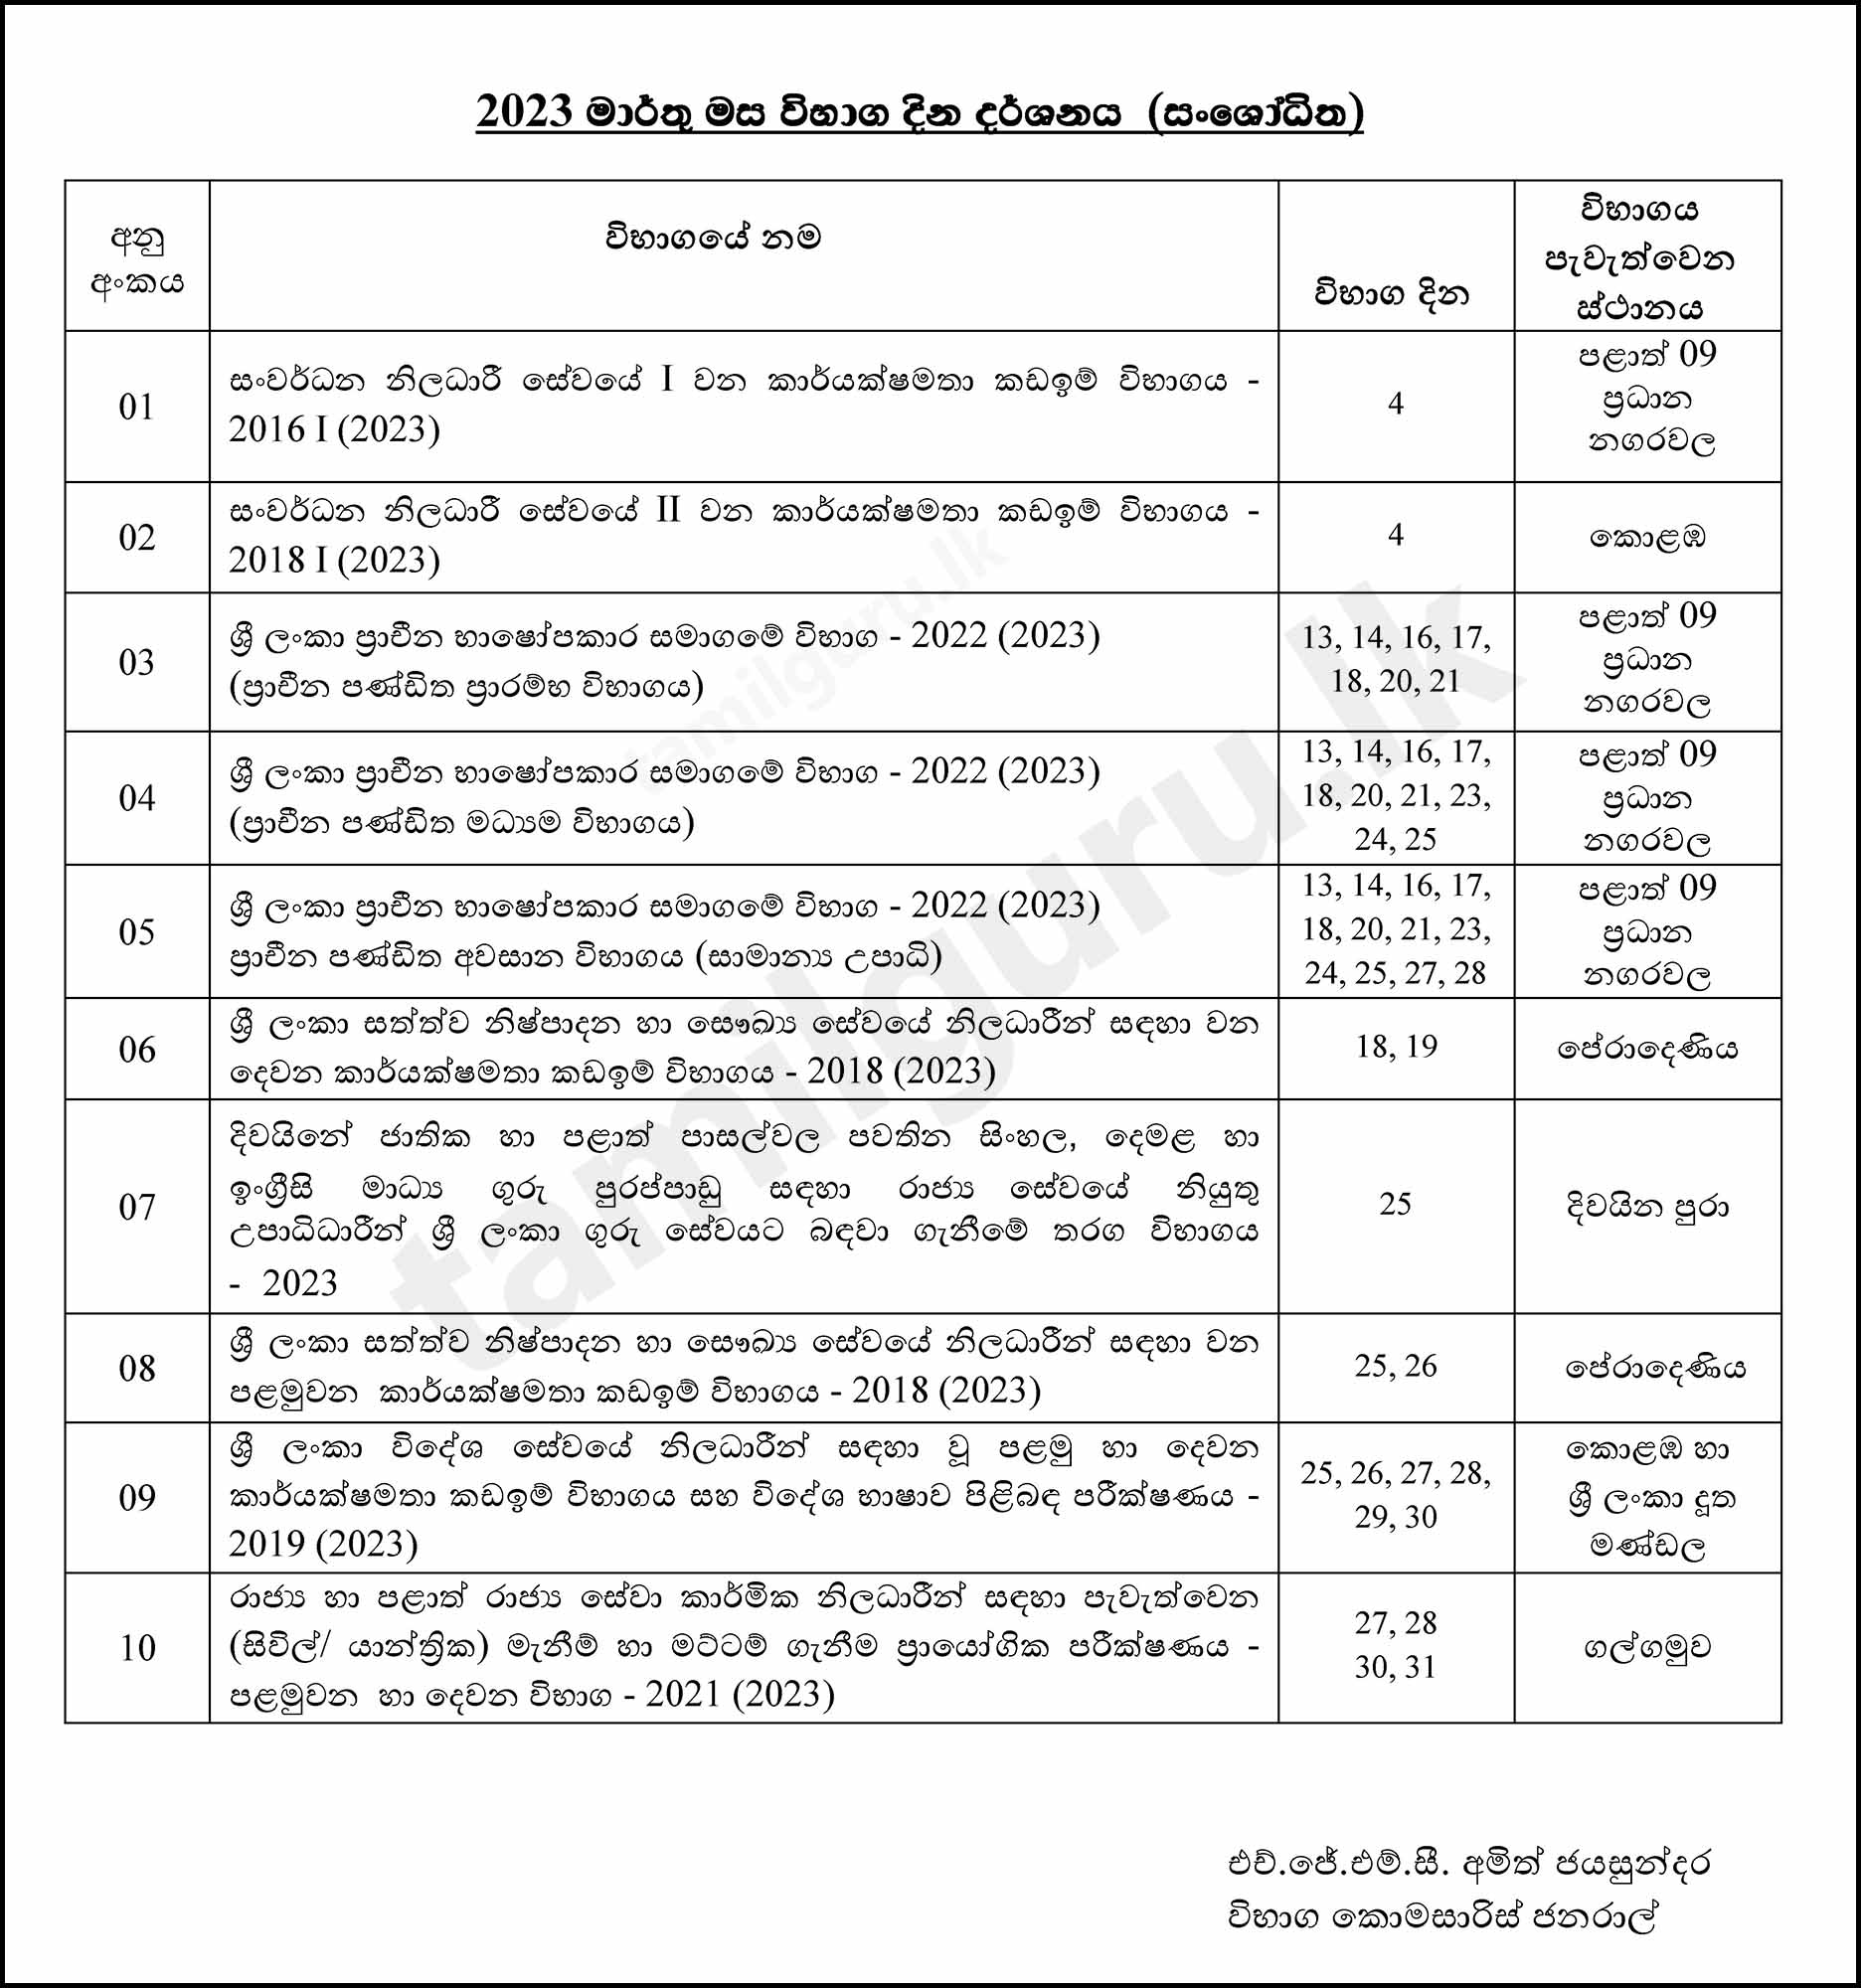 Examination Calendar for March 2023 (Amended) - Department of Examinations